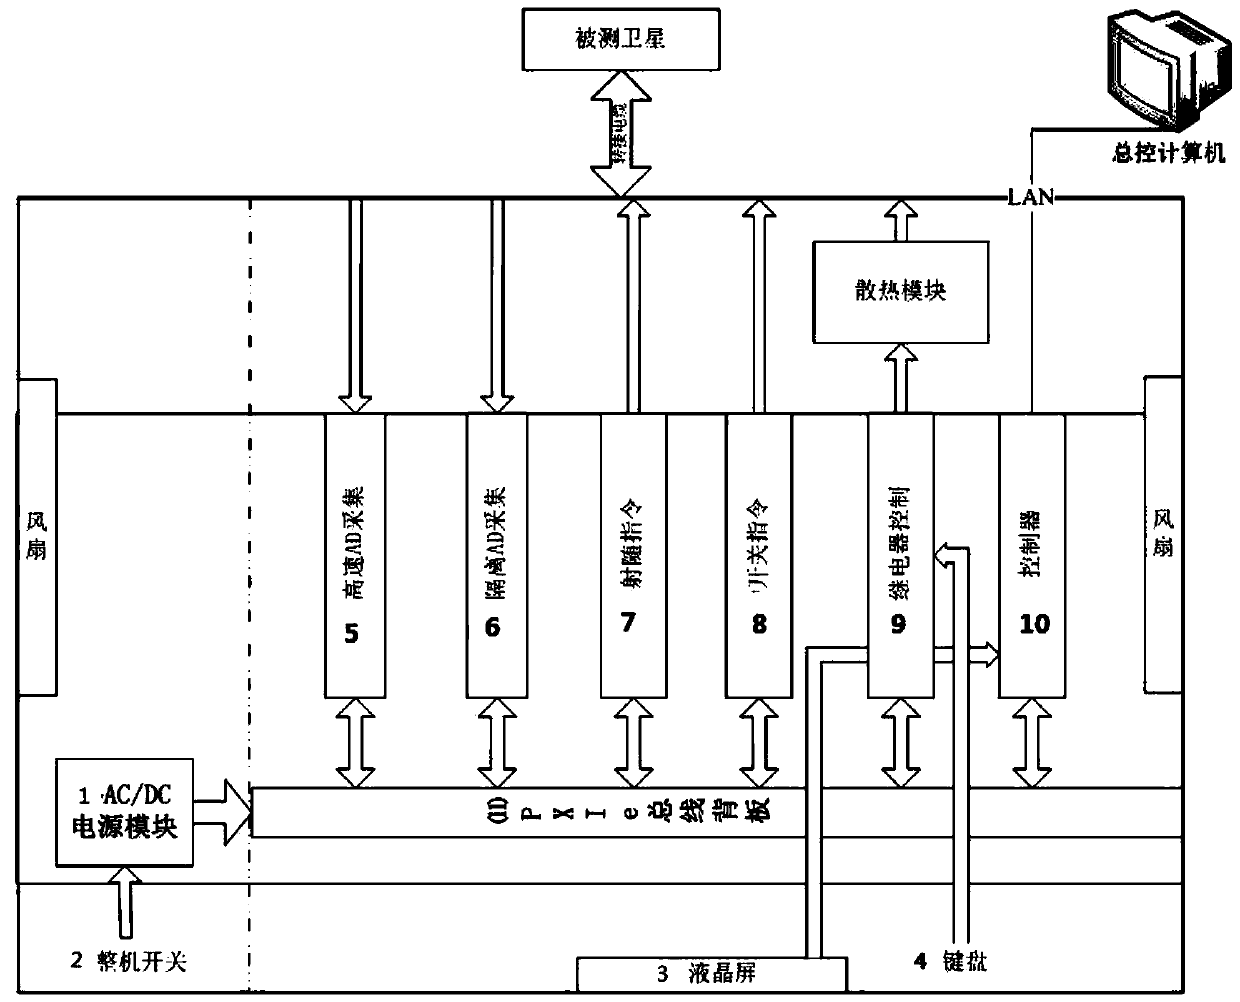 Highly-integrated satellite centralized power supply monitoring device